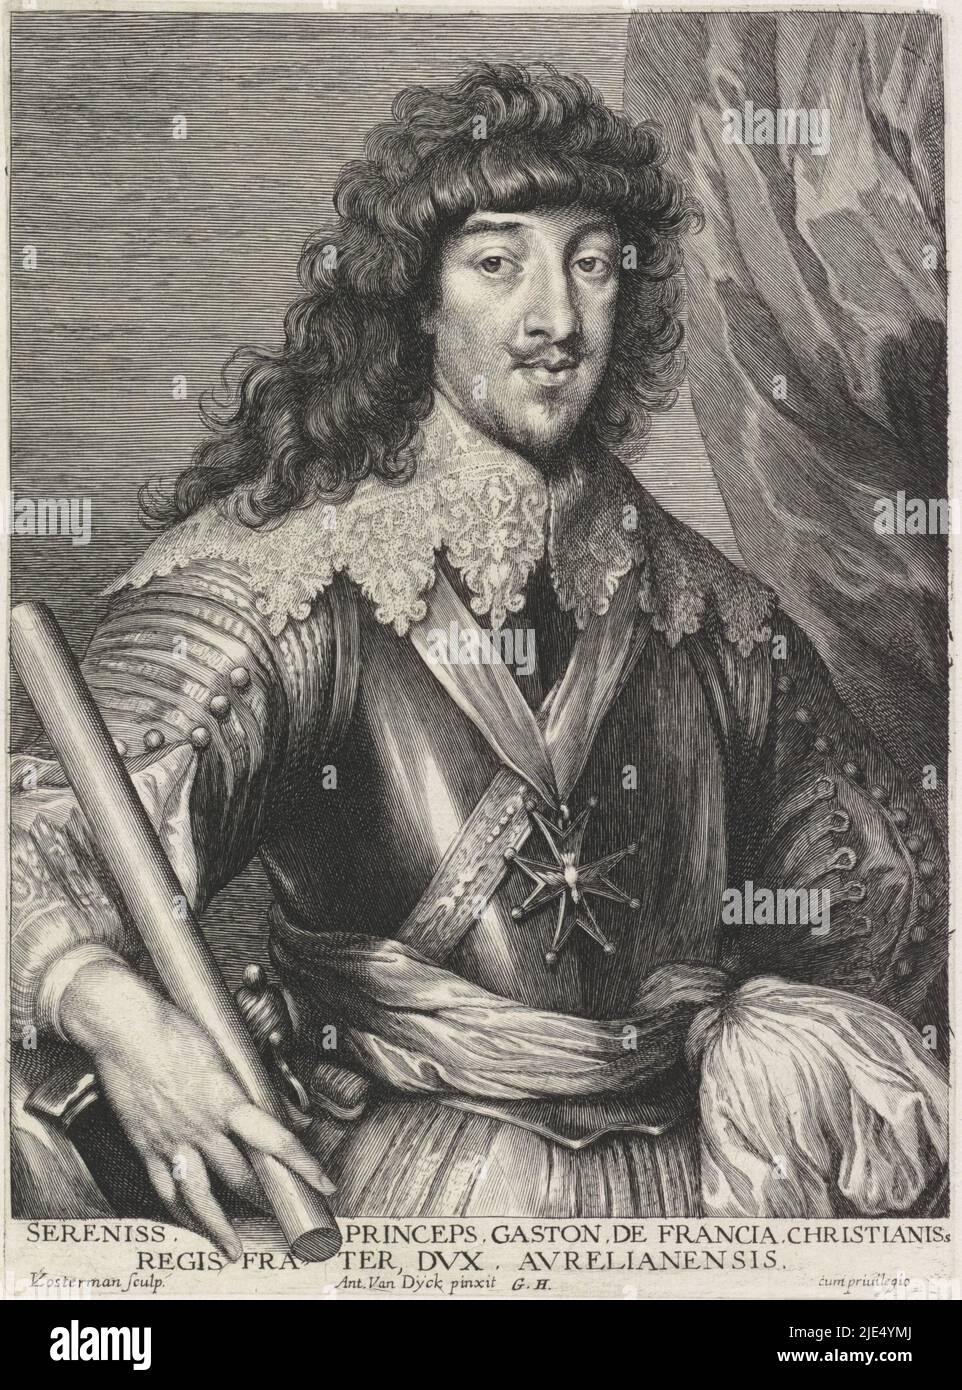 Portrait of Gaston Jean-Baptiste of France, Duke of Orleans Iconography (series title), print maker: Lucas Vorsterman (I), (mentioned on object), after: Anthony van Dyck, (mentioned on object), publisher: Gilles Hendricx, (mentioned on object), Antwerp, 1645 - 1646, paper, engraving, h 231 mm × w 170 mm Stock Photo